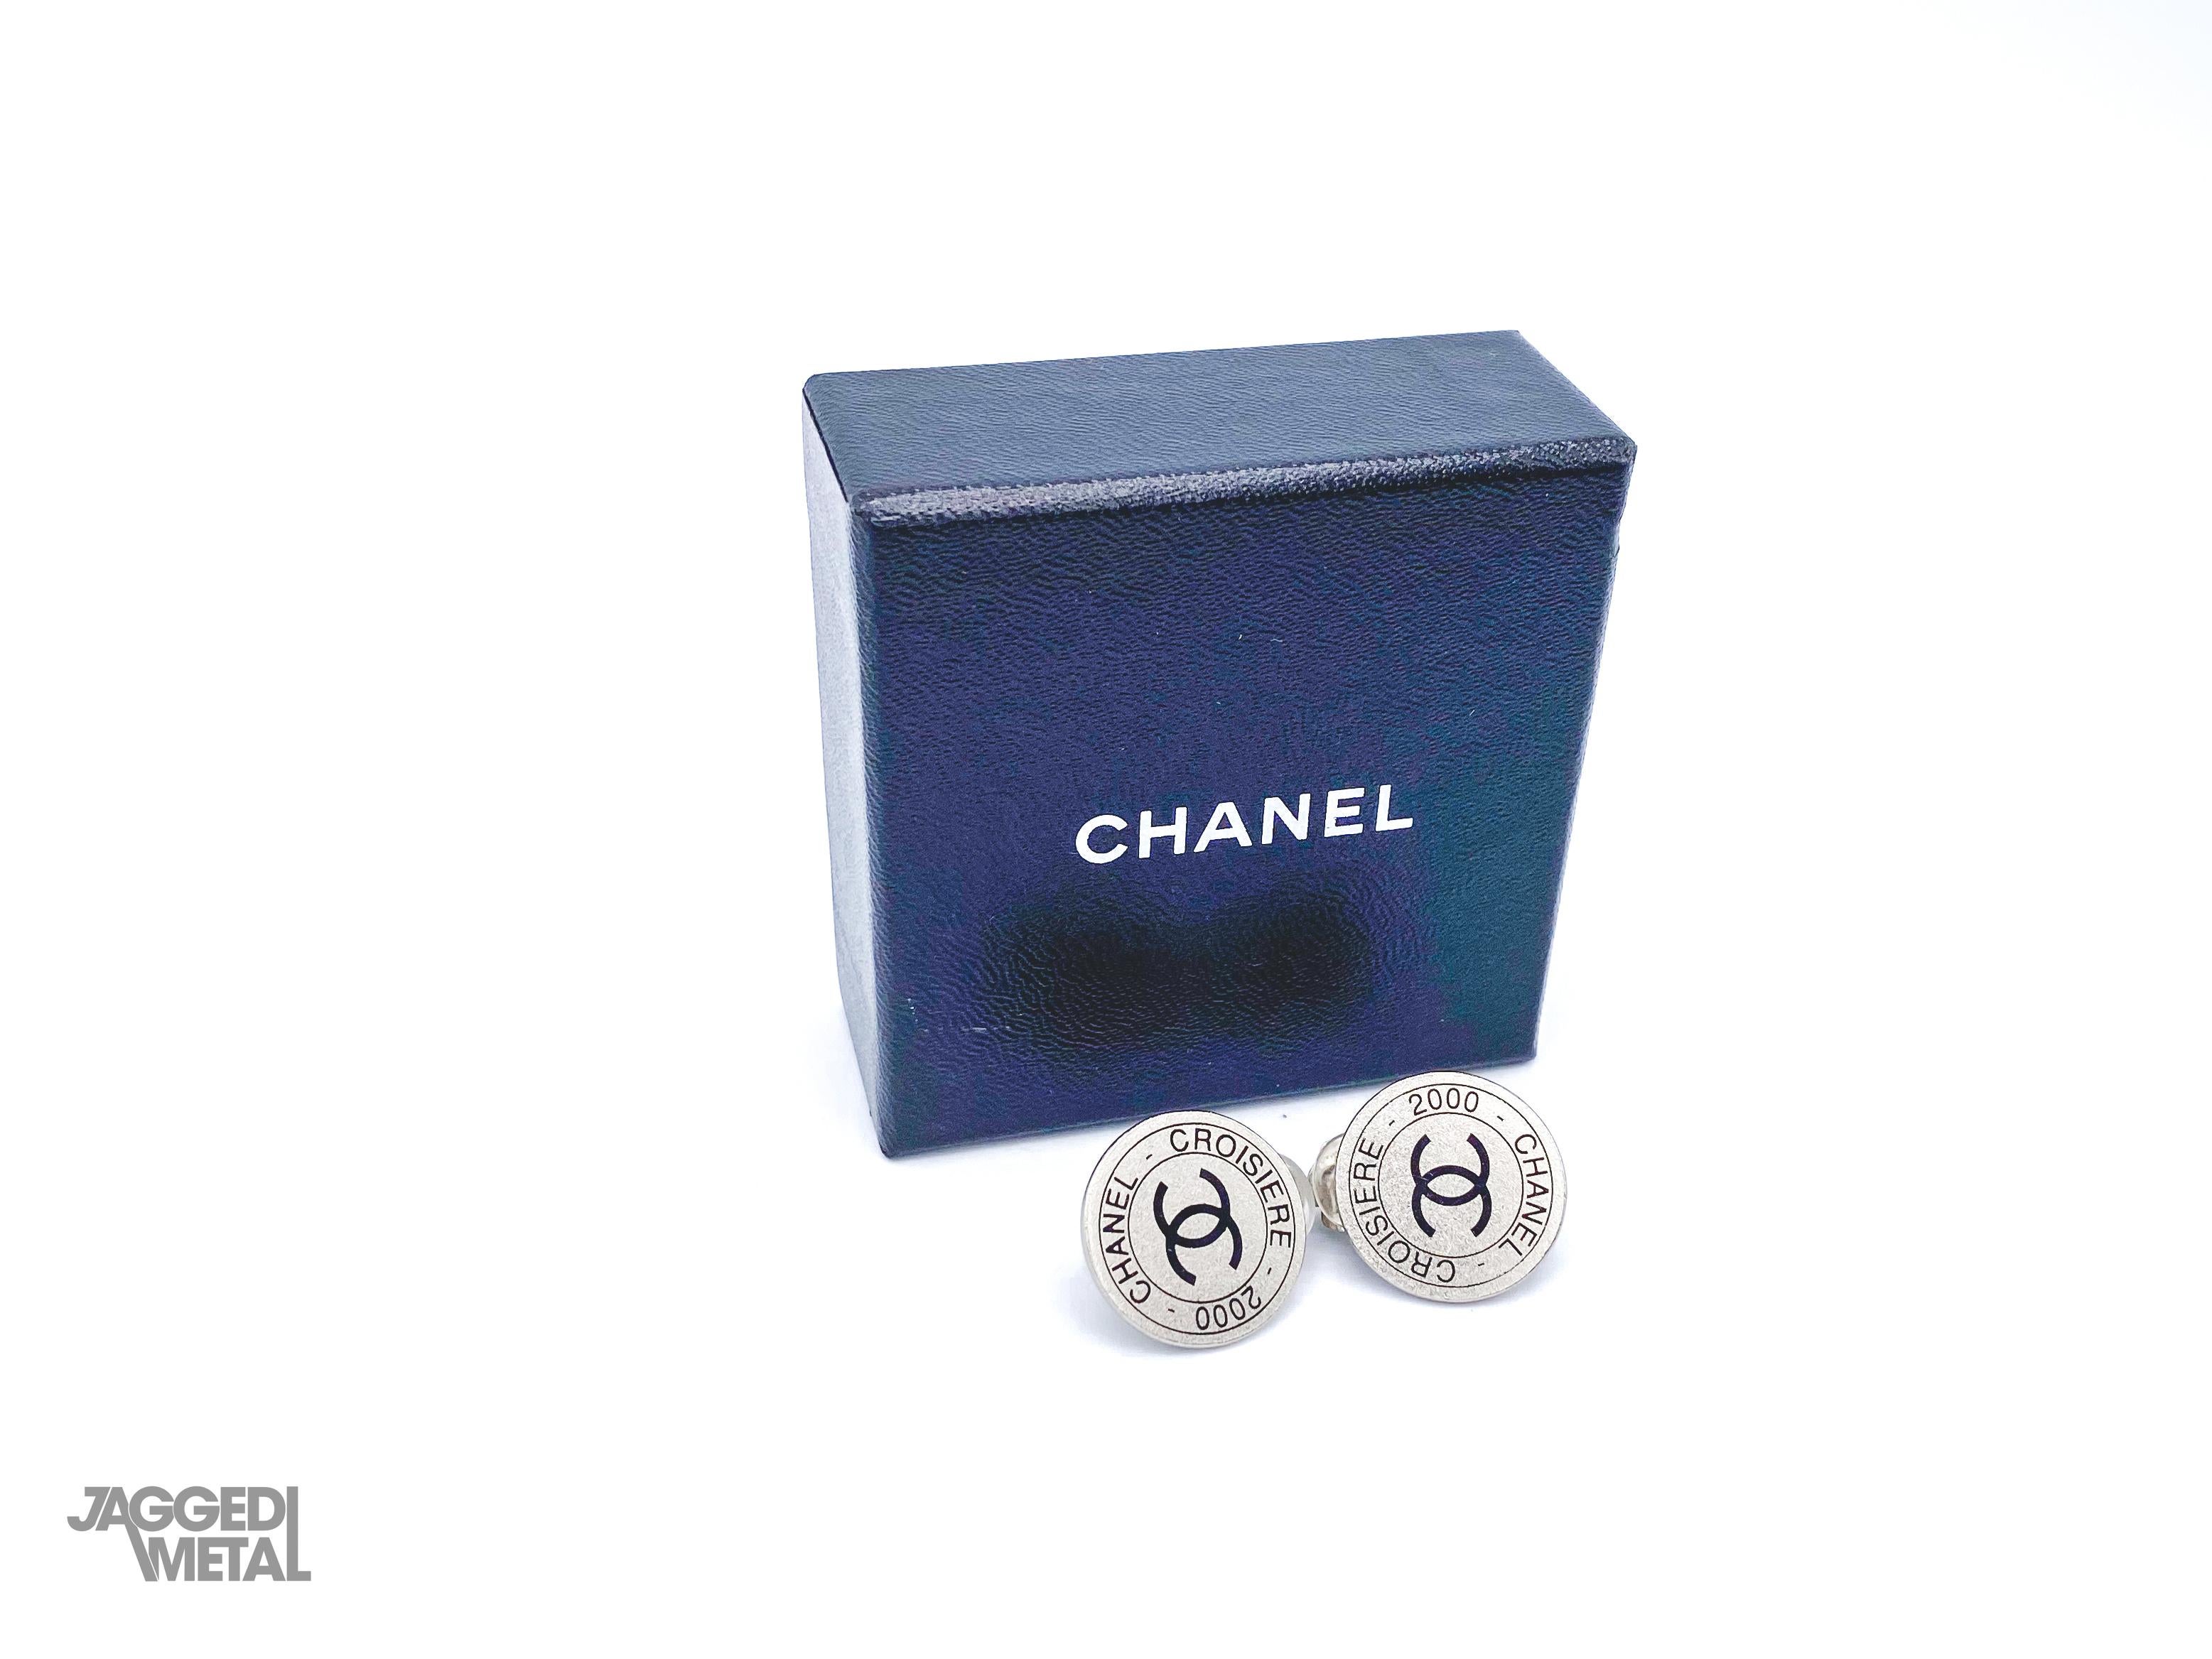 Chanel Vintage 2000s Clip On Earrings

Detail
-Made in France for the 2000 Cruise Collection
-Stainless steel silver tone metal
-Feature the iconic CC logo front and centre in black
-The words Chanel Croisiere 2000 surround the CC (French for Chanel